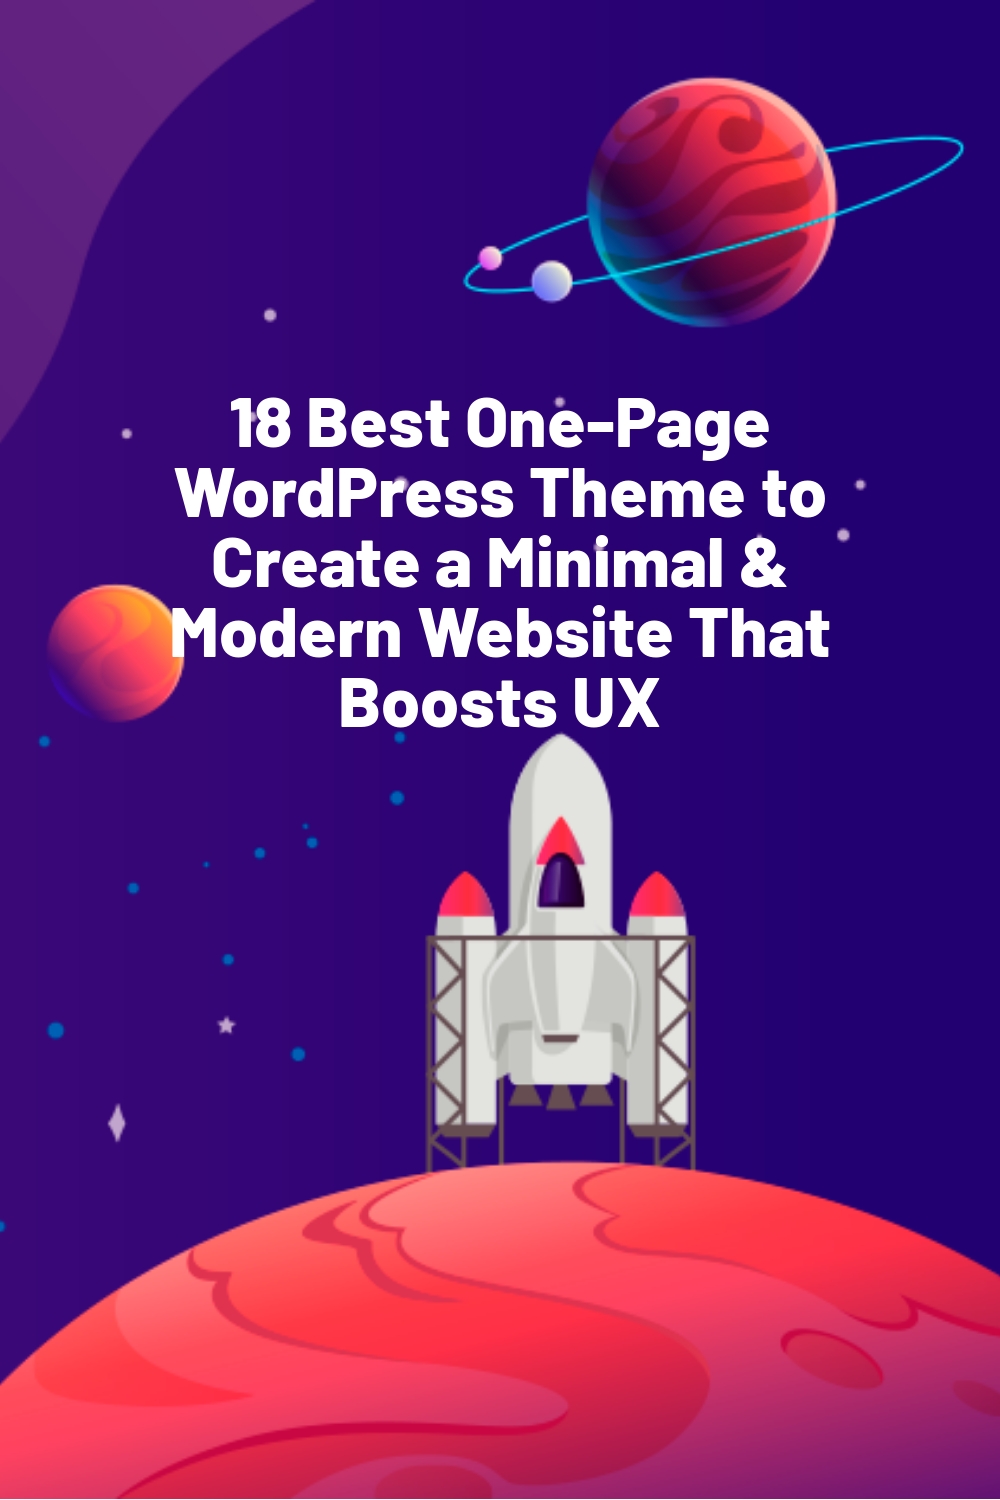 18 Best One-Page WordPress Theme to Create a Minimal & Modern Website That Boosts UX